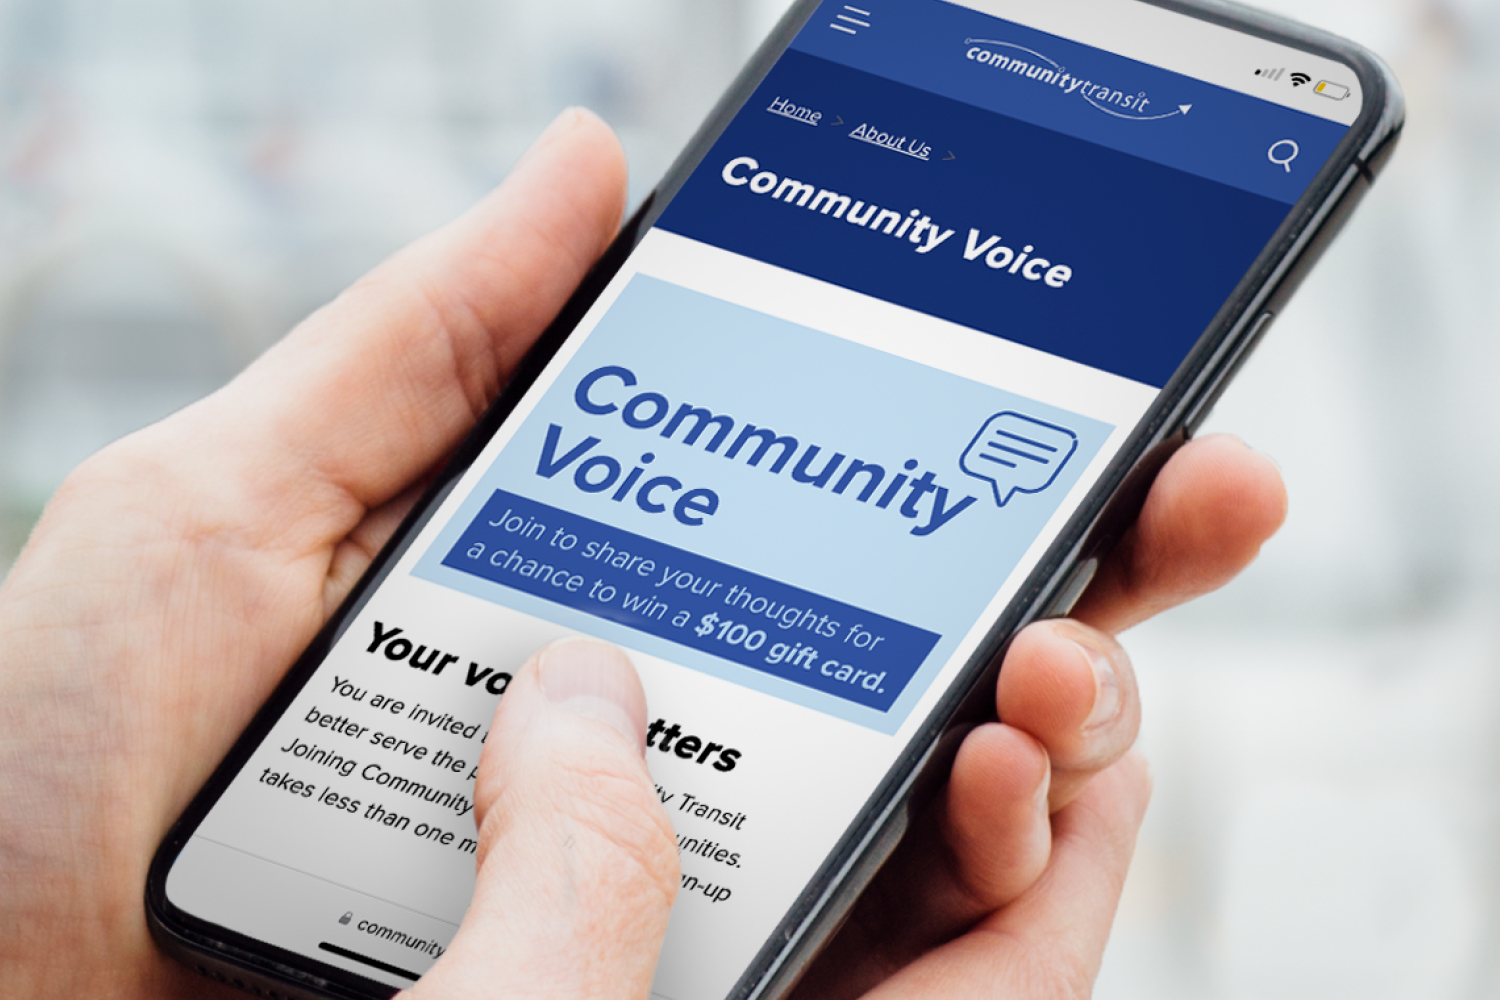 Community Voice web page on mobile device